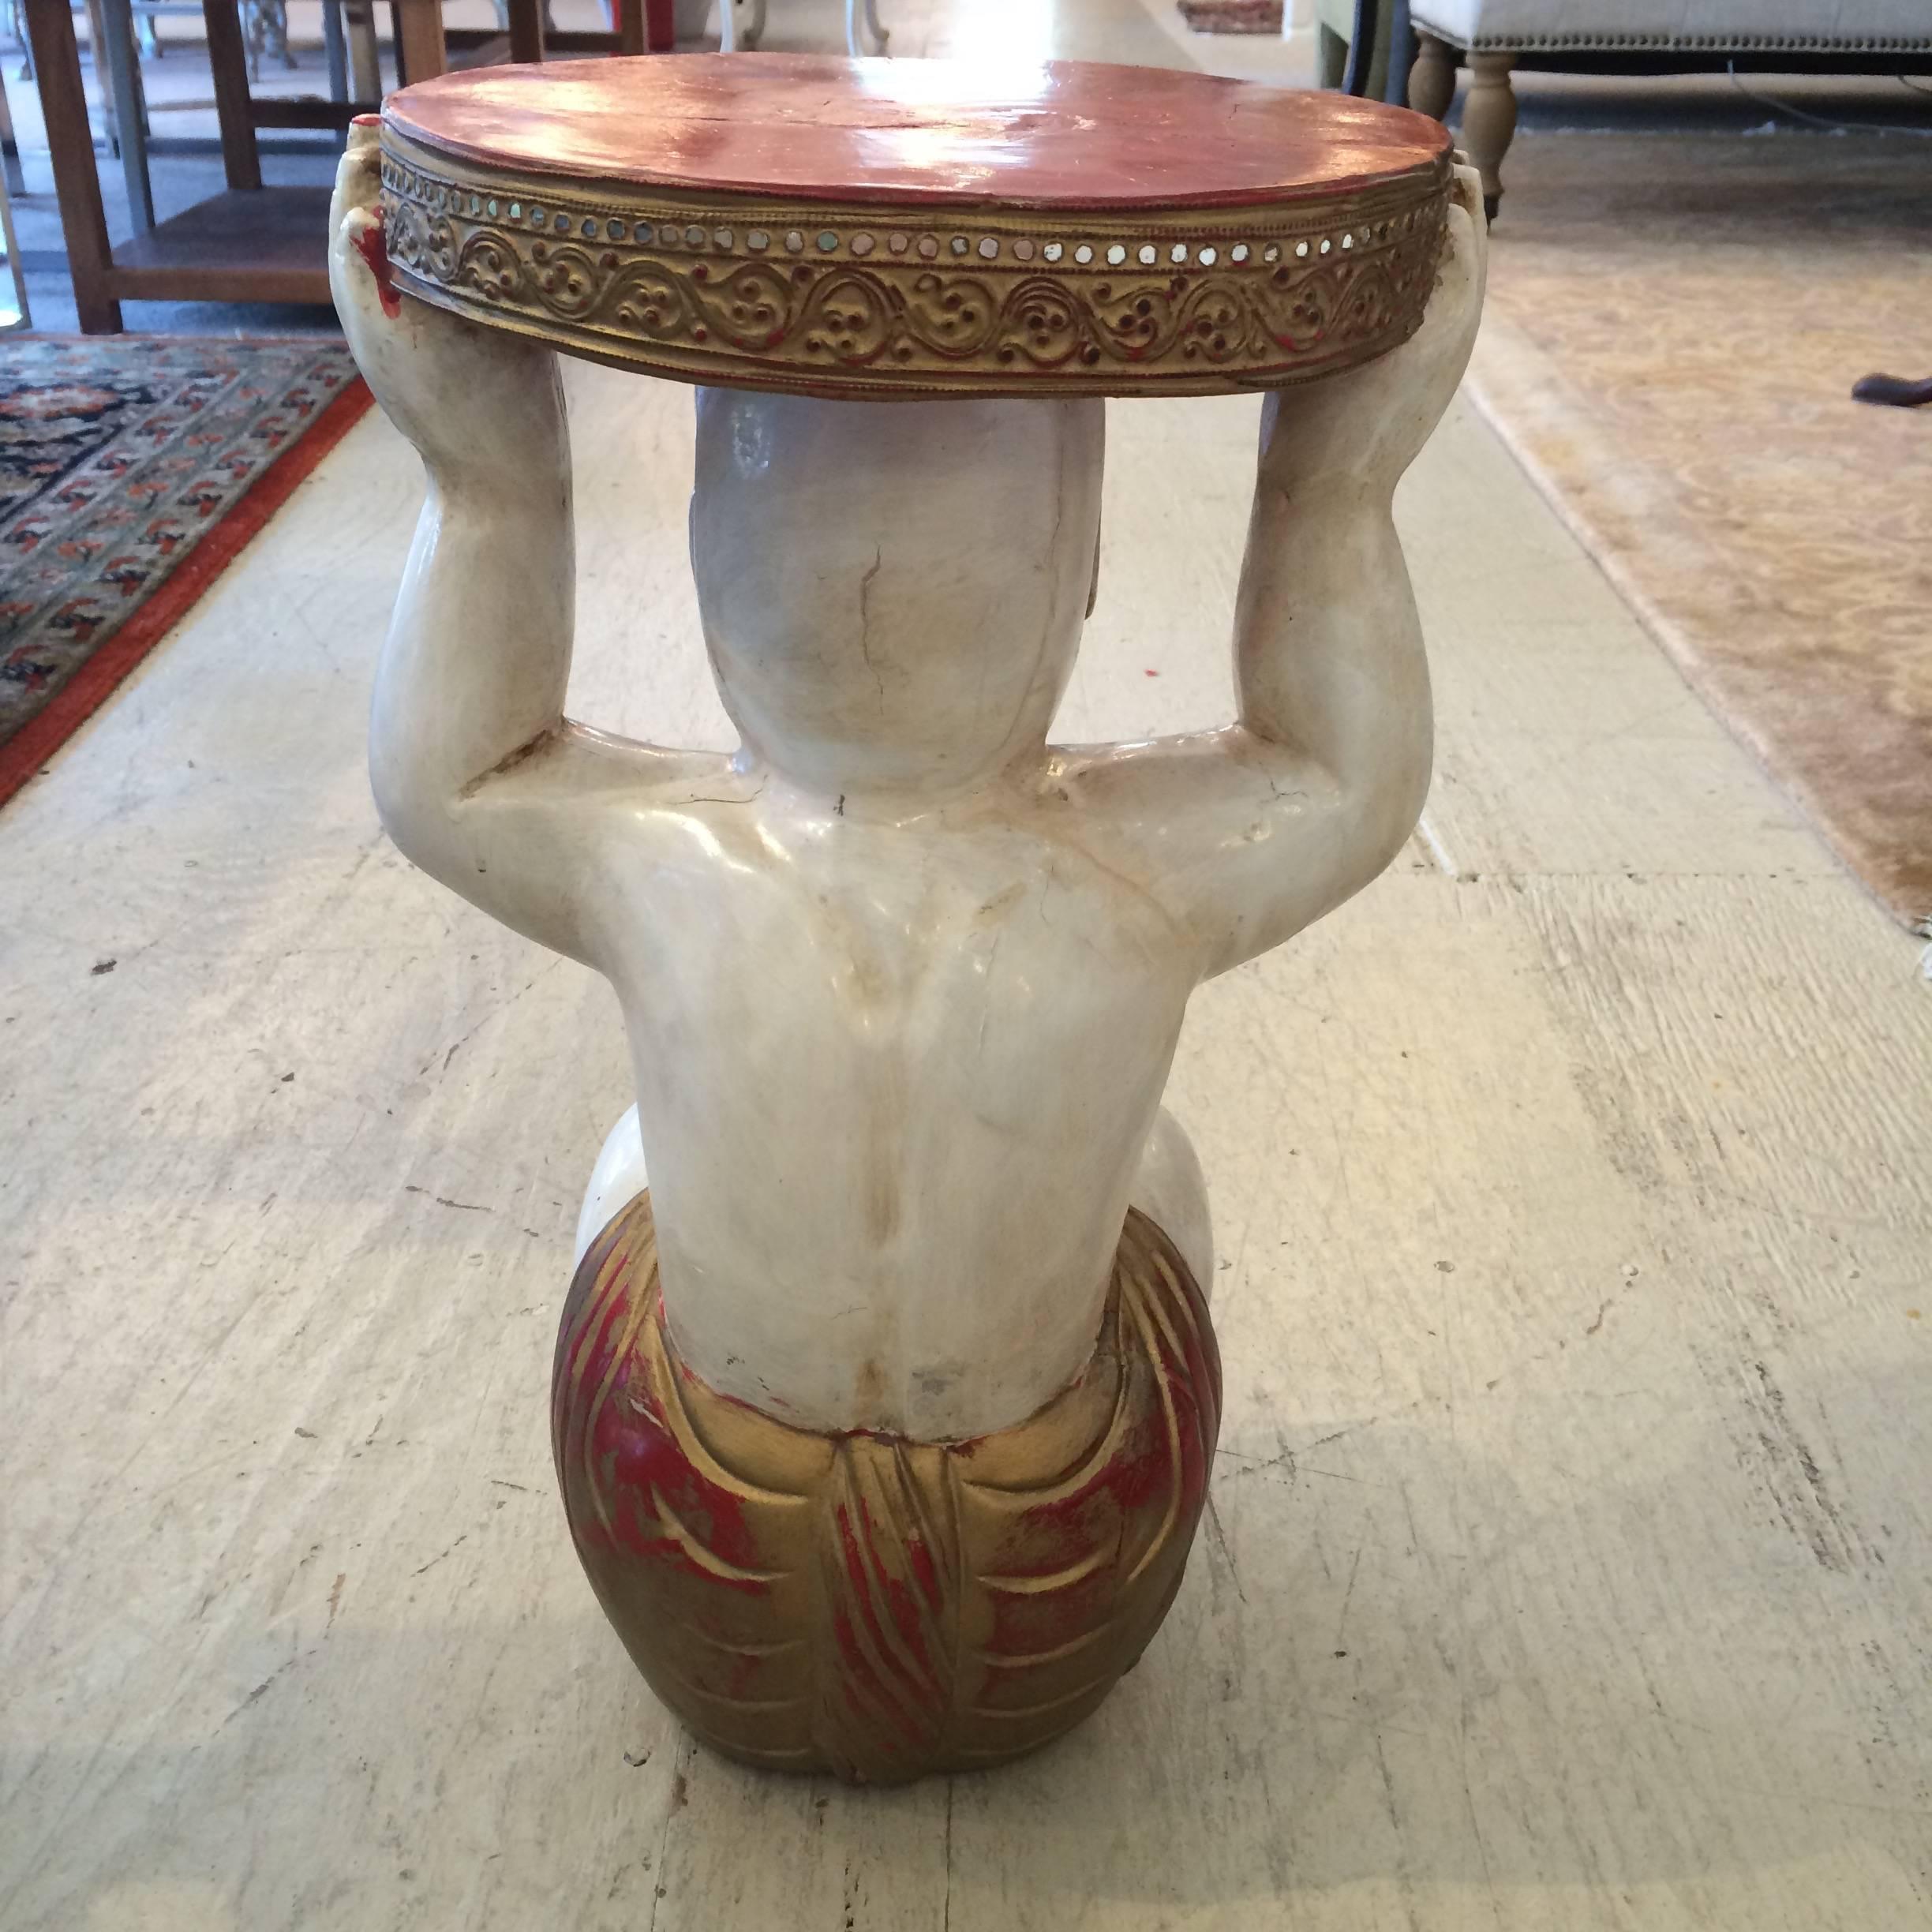 Fabulous little carved wood, painted and gilded drinks or side table in the shape of a Buddha holding the table surface on his head. Inset bits of mirror adorn the periphery of the table top which is a stylish Asian red.